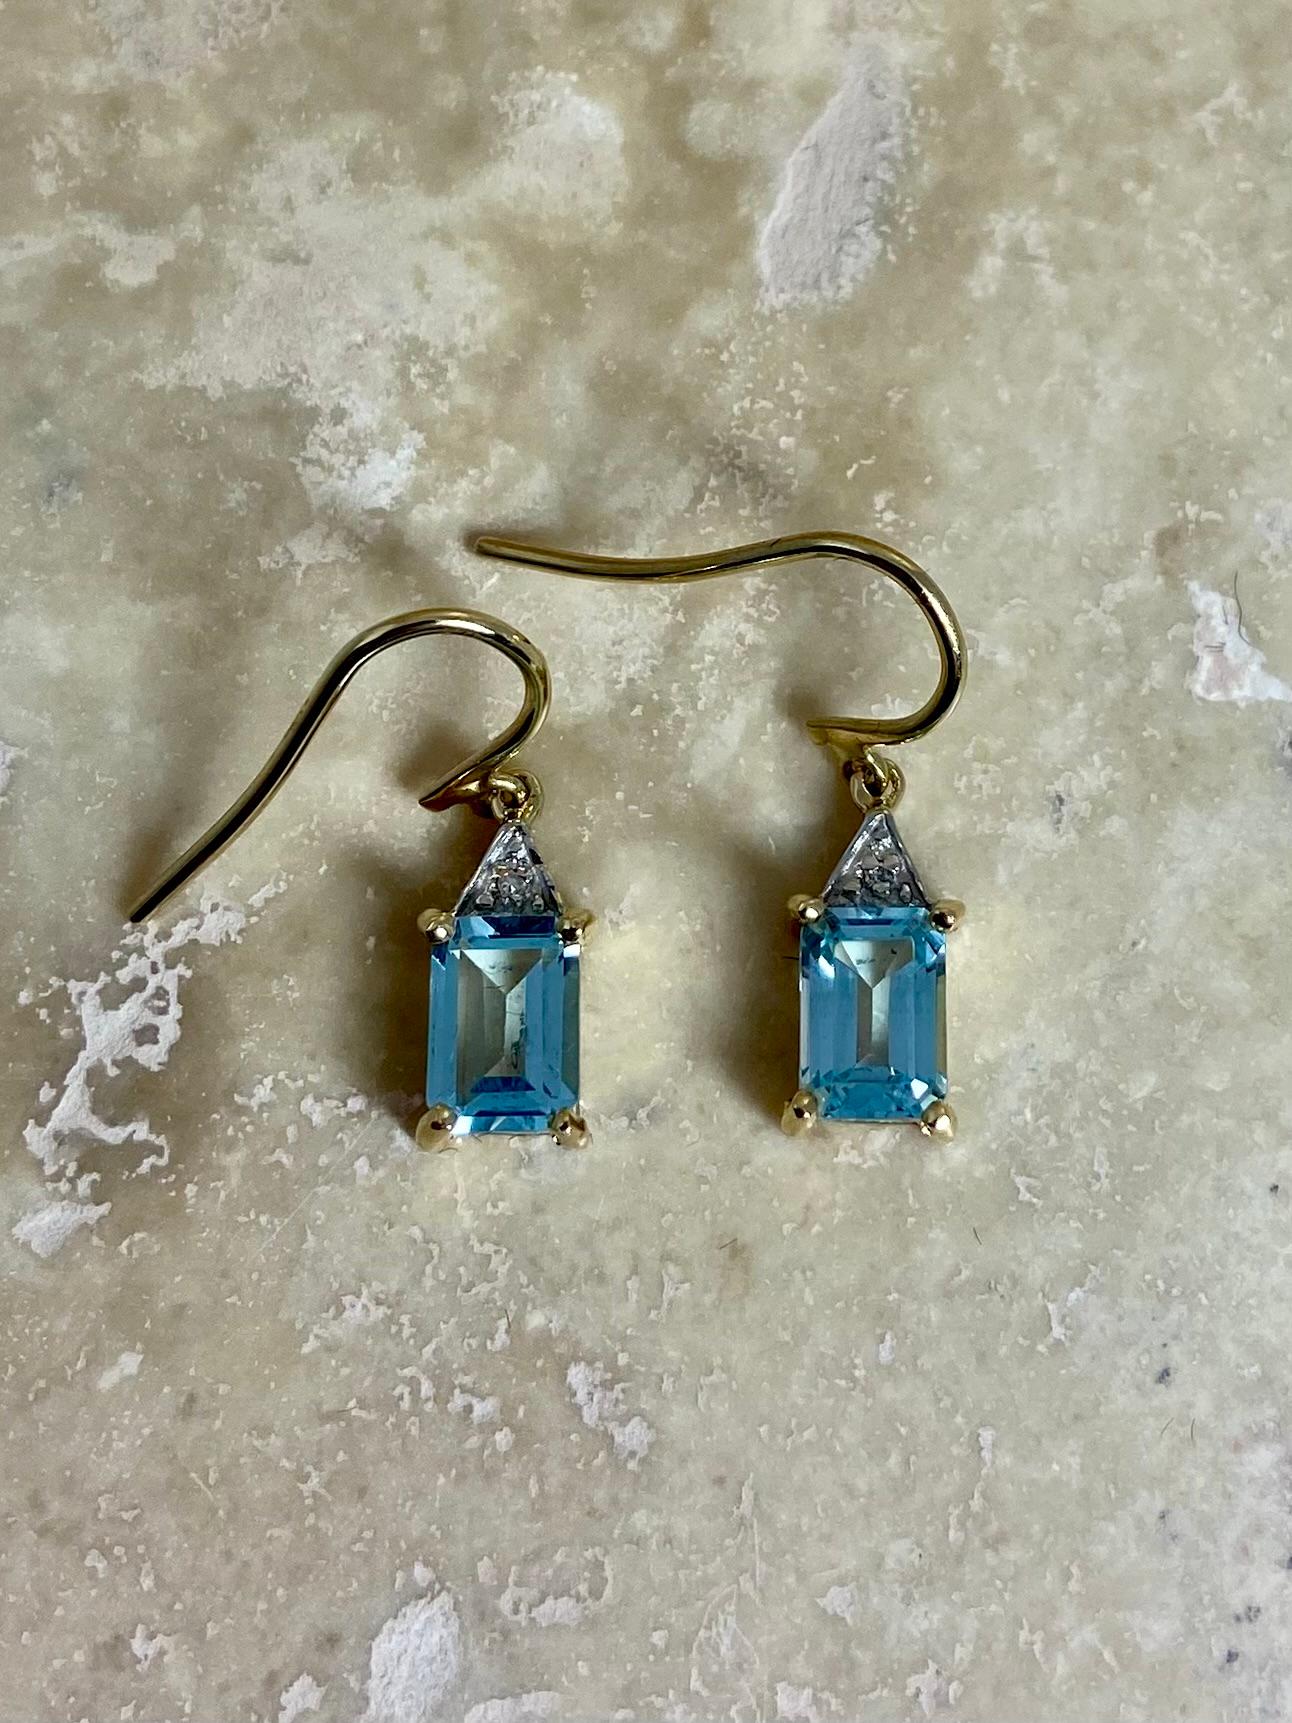 Beautiful and elegant pre-loved  earrings made of 9 carat yellow gold with blue topas. The color blue is truly beautiful and will show bright and vivid in your ears. The topas has an emerald cut with on top diamond stimulant. The height of the